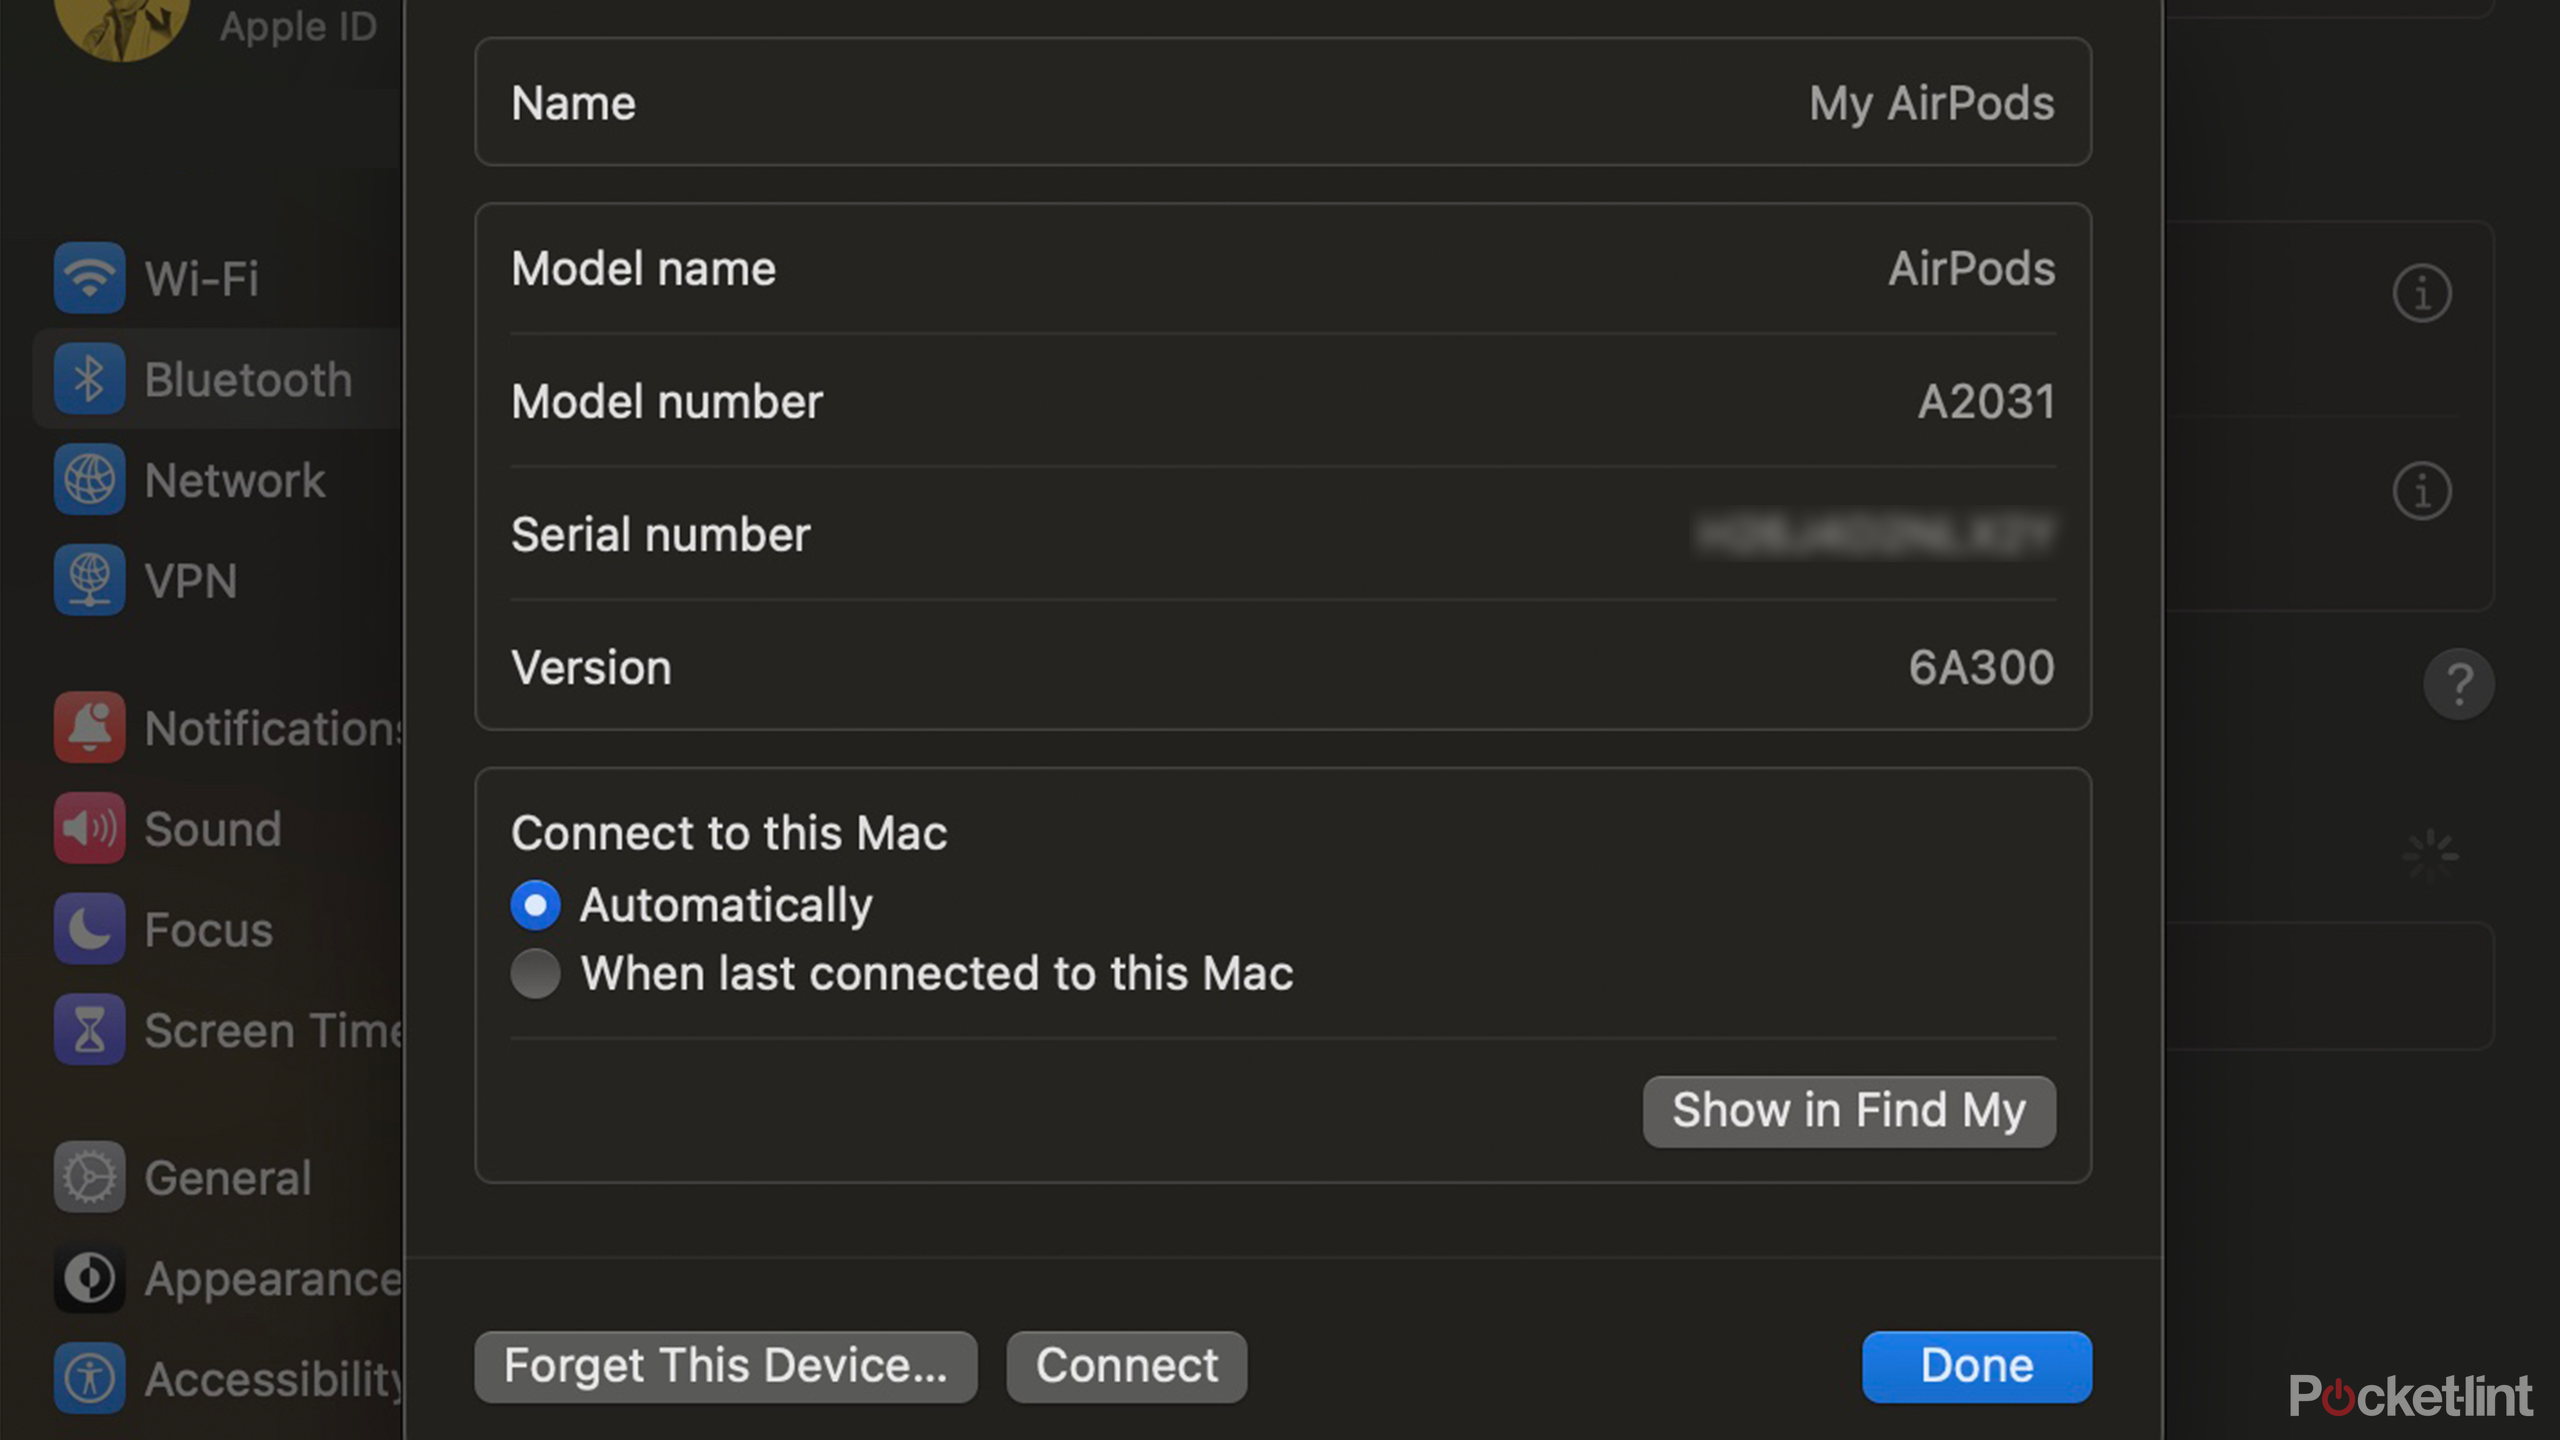 airpods firmware version on mac